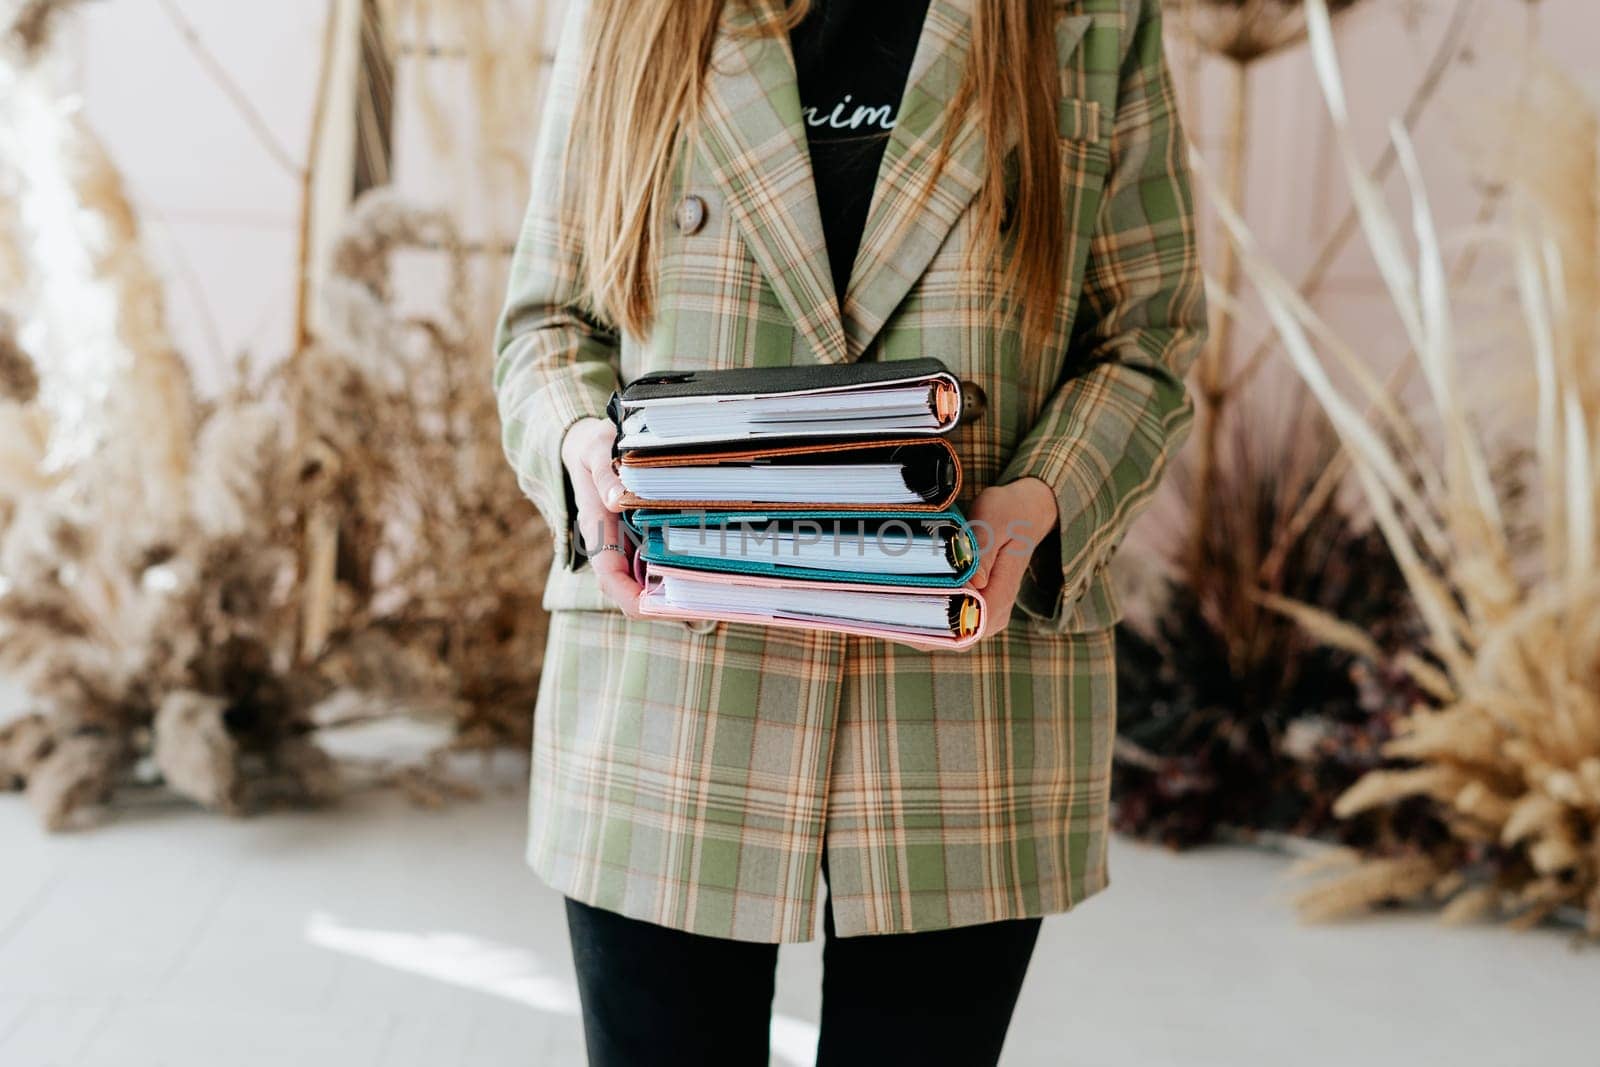 Business woman office secretary suit holding stack of notebooks. Student with a stack of notepads and dry flowers in the background. Cropped girl in a stylish office outfit holds books in her hands.